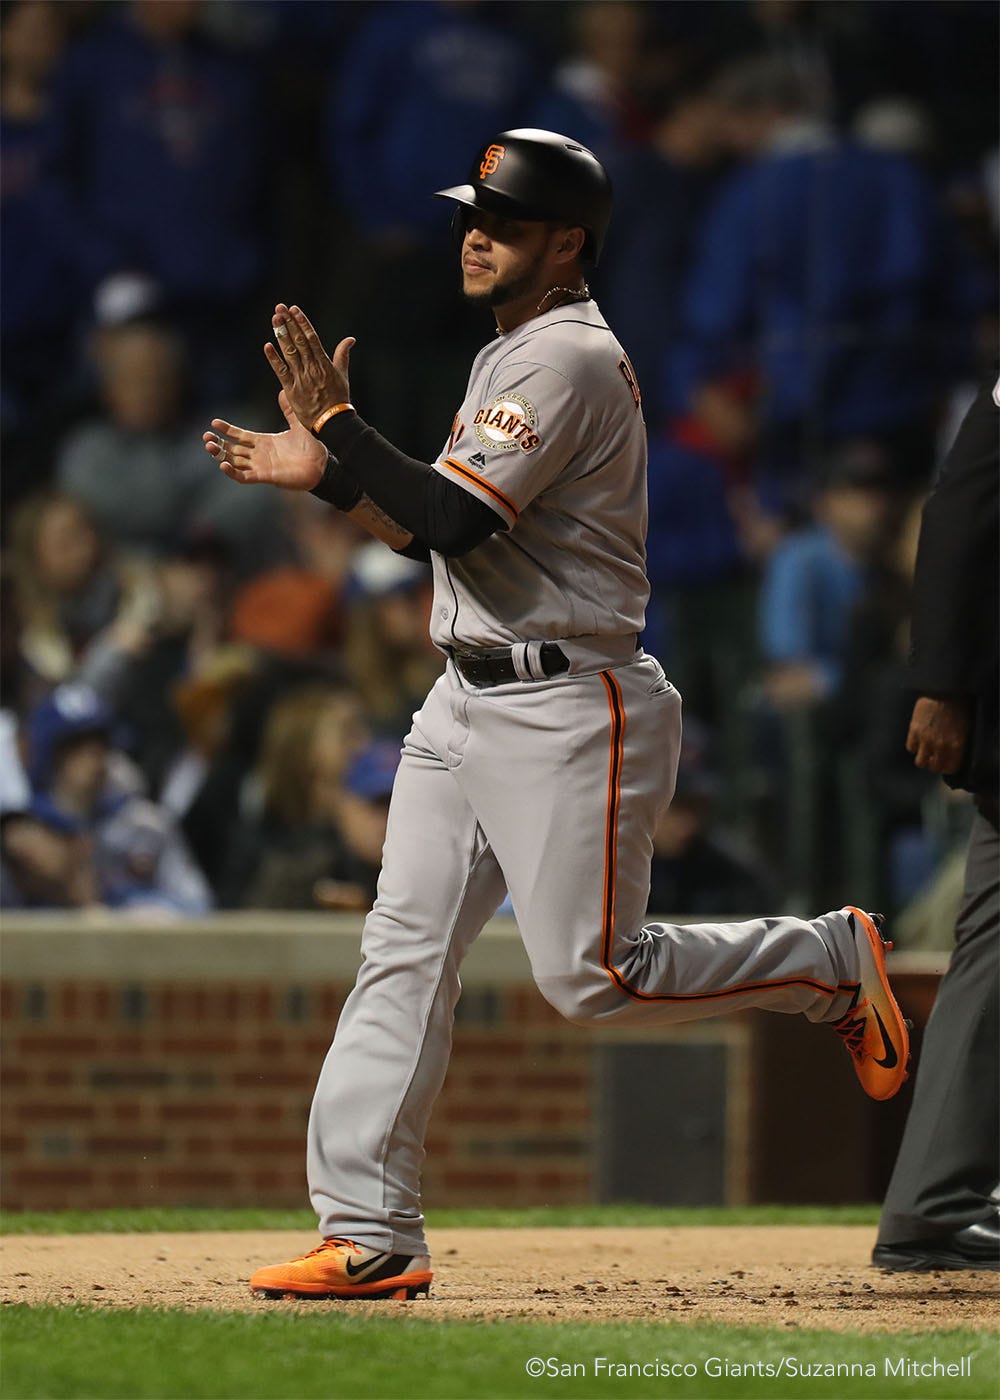 Gregor Blanco crosses the plate after scoring on a sacrifice fly hit by Brandon Belt.